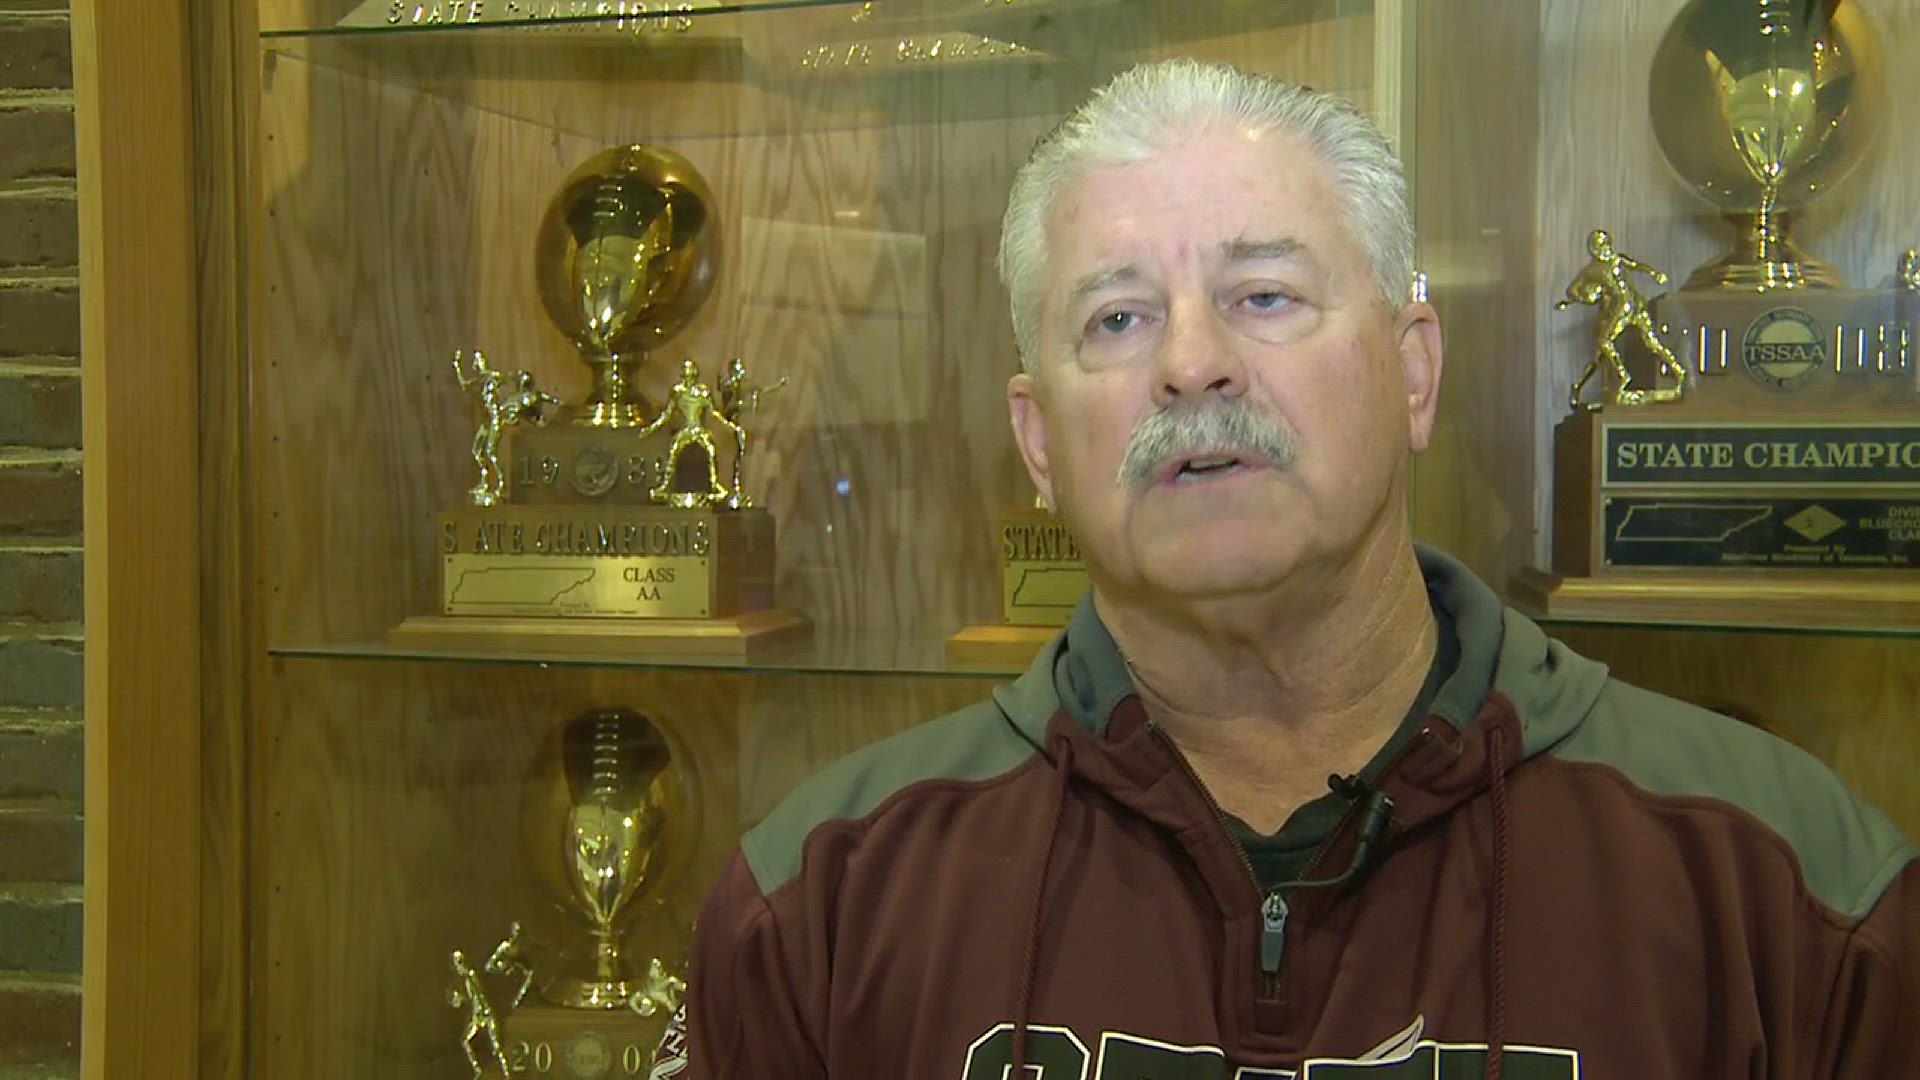 Alcoa head coach Gary Rankin says he has the utmost respect for George Quarles and what he's done for the Blount County community.